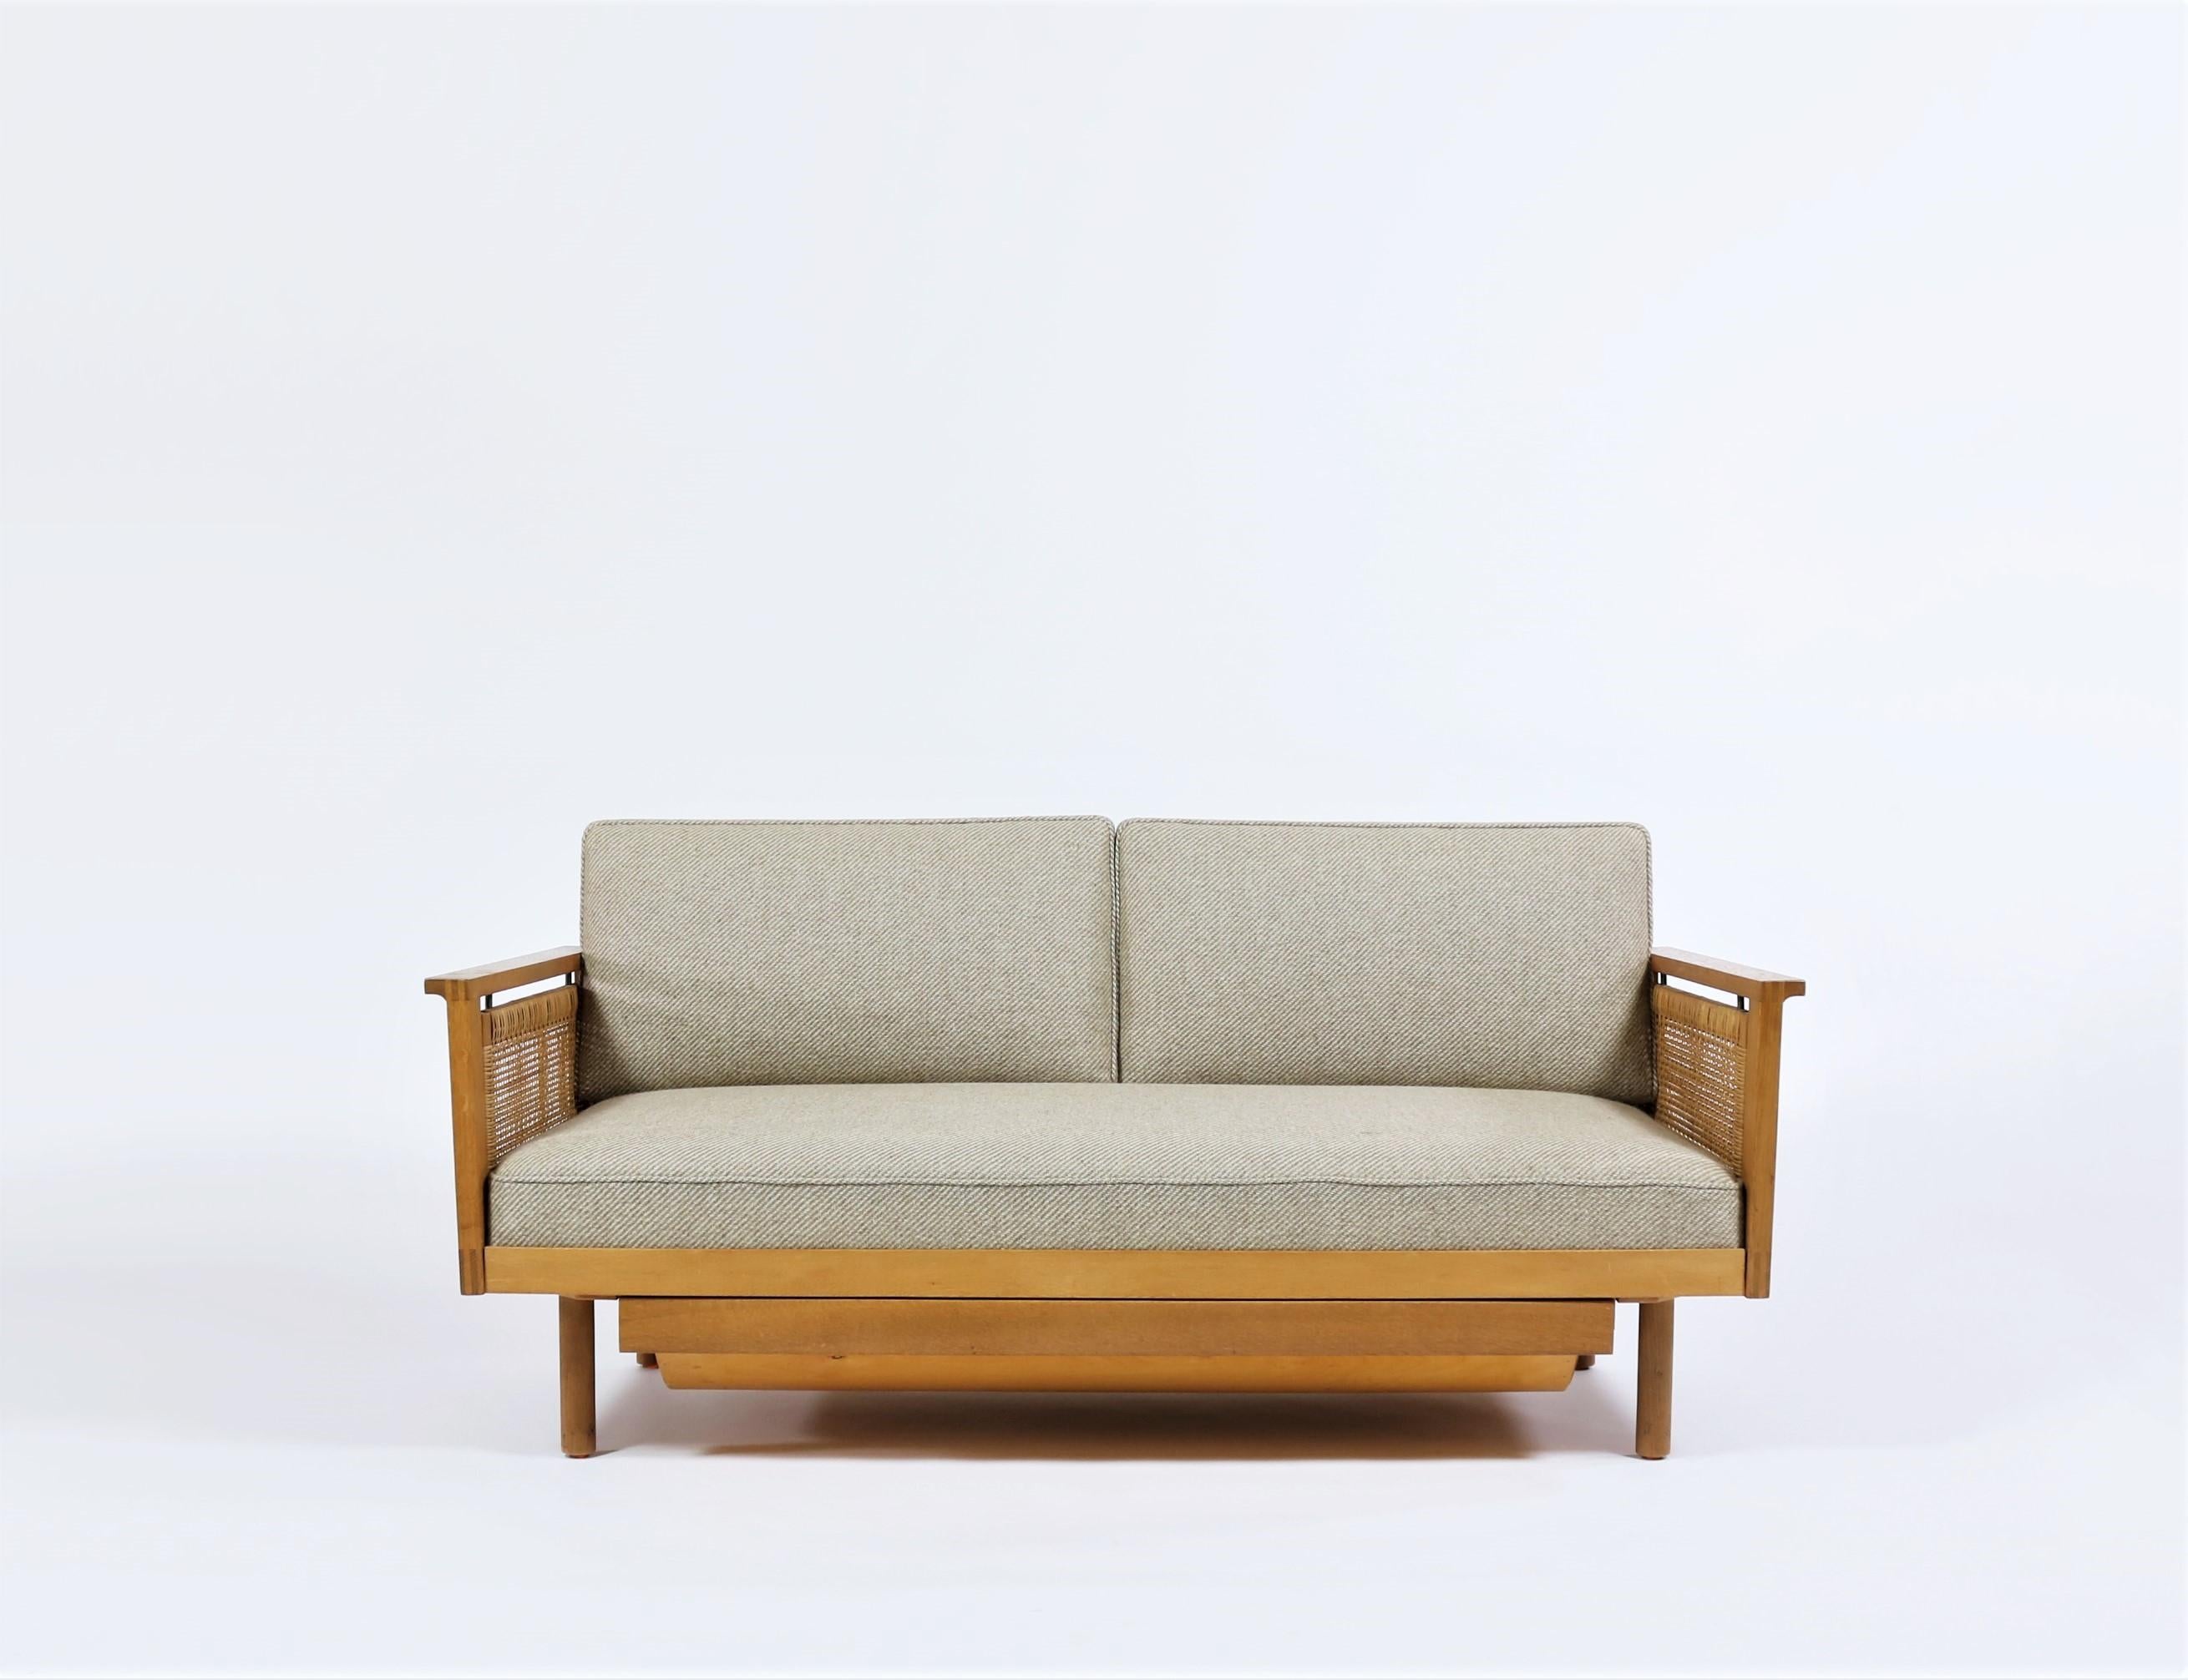 Charming daybed by Danish architect Illum Wikkelsøe made at cabinetmaker N. Eilersen in the 1950s. The bed is made from solid oak and features beautiful hand crafted details. The daybed has fold-down cane sides that can be adjusted to three